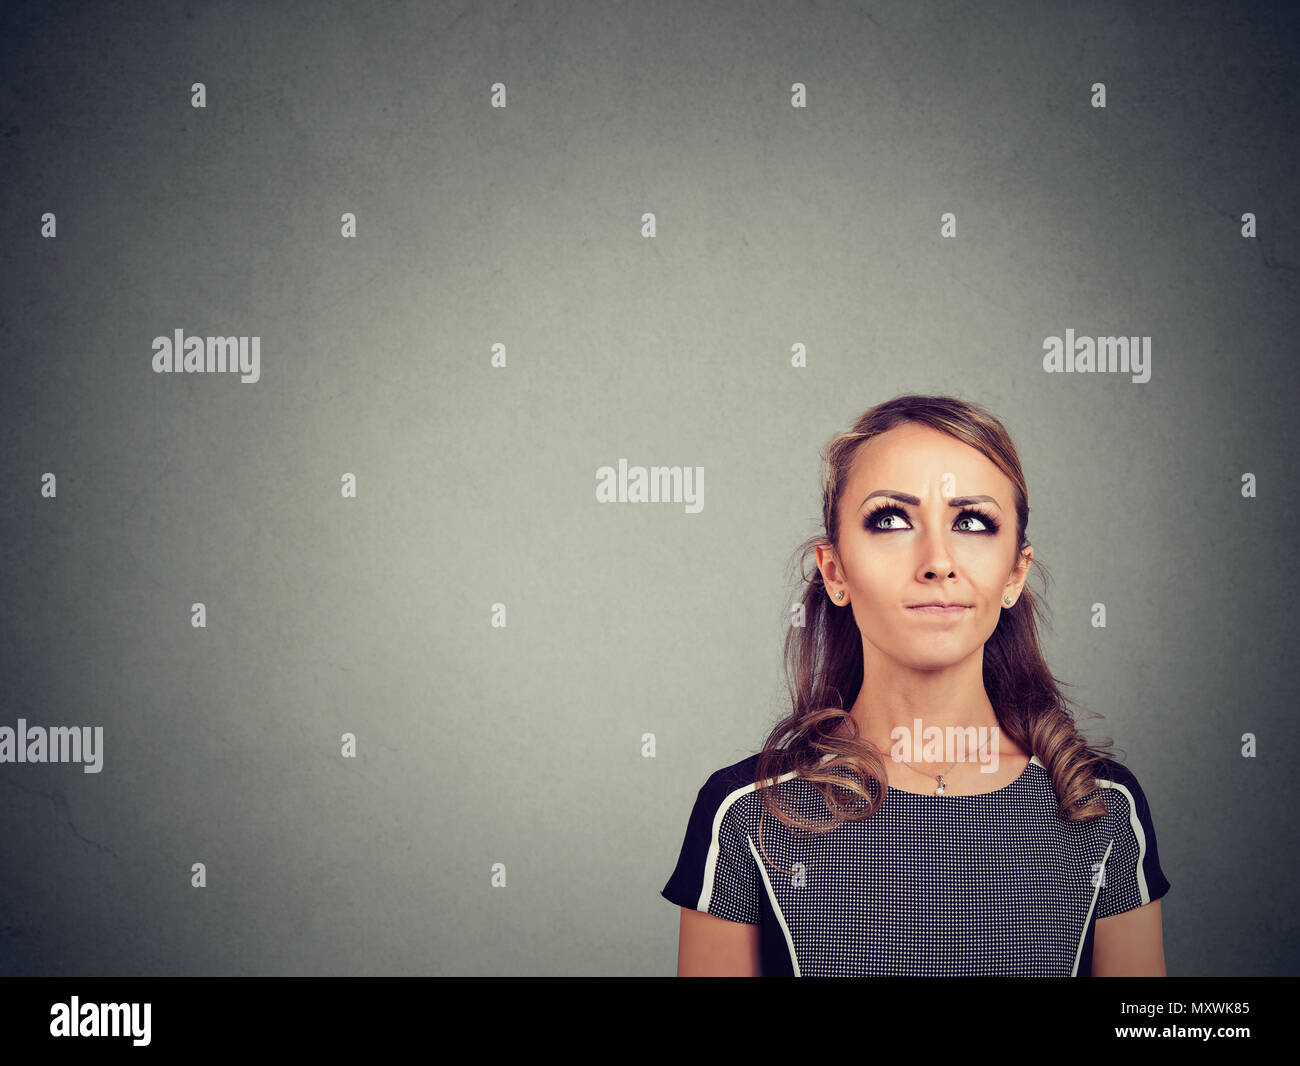 Pretty young woman looking up in suspicion trying to make correct decision Stock Photo